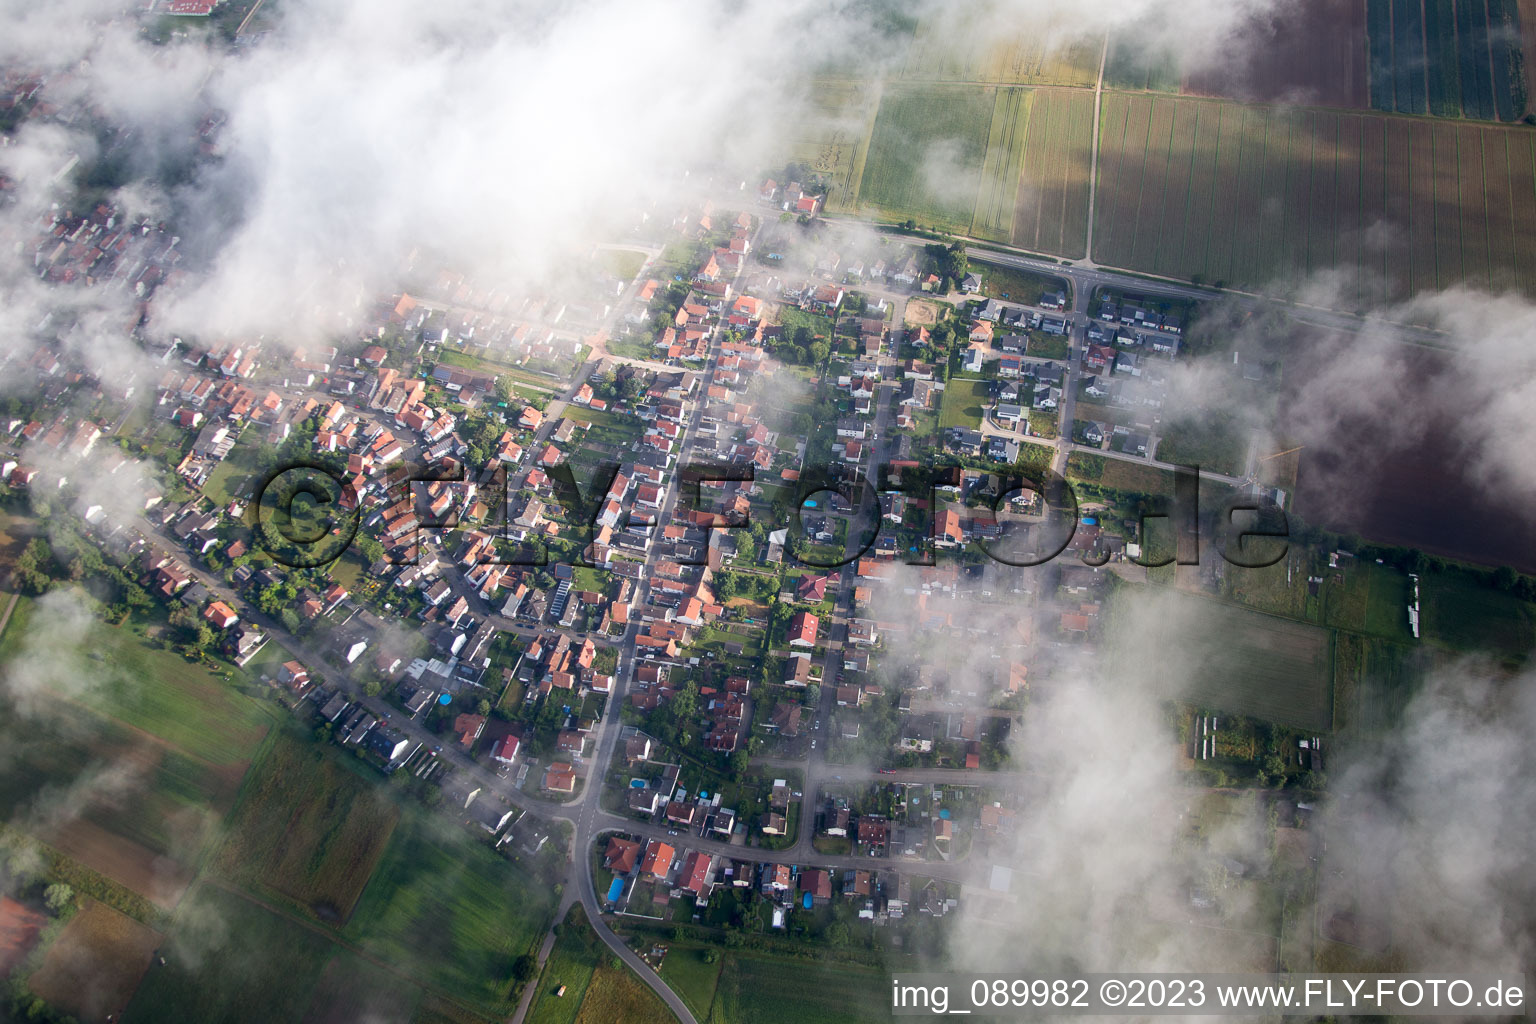 Aerial photograpy of Minfeld in the state Rhineland-Palatinate, Germany